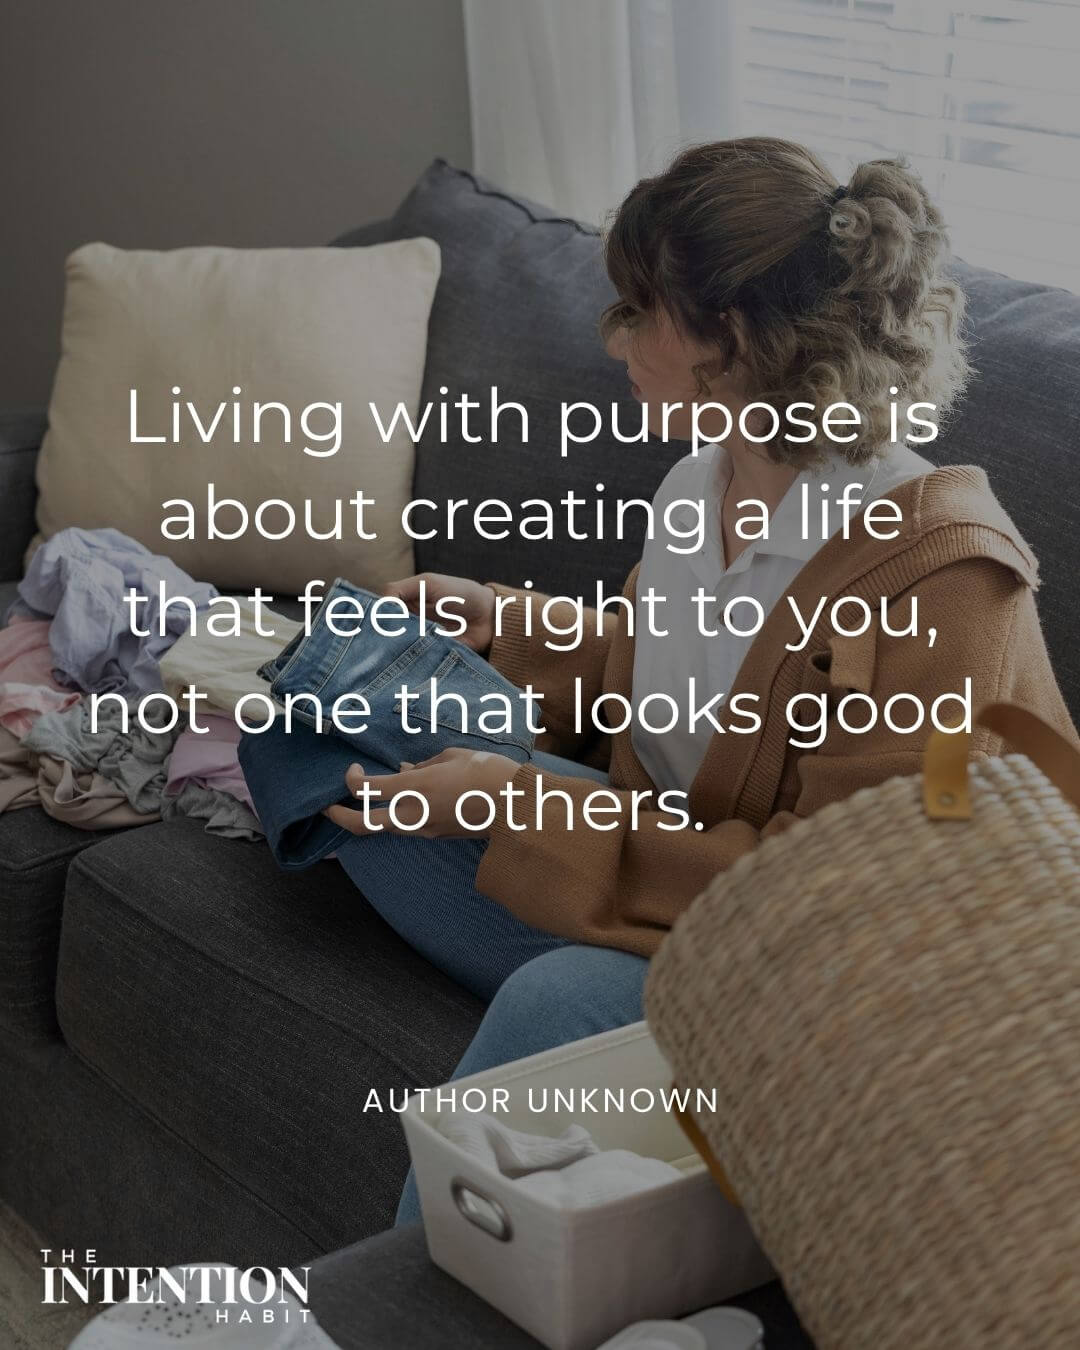 Intentional living quote - living with purpose is about creating a life that feels right to you not one that looks good to others